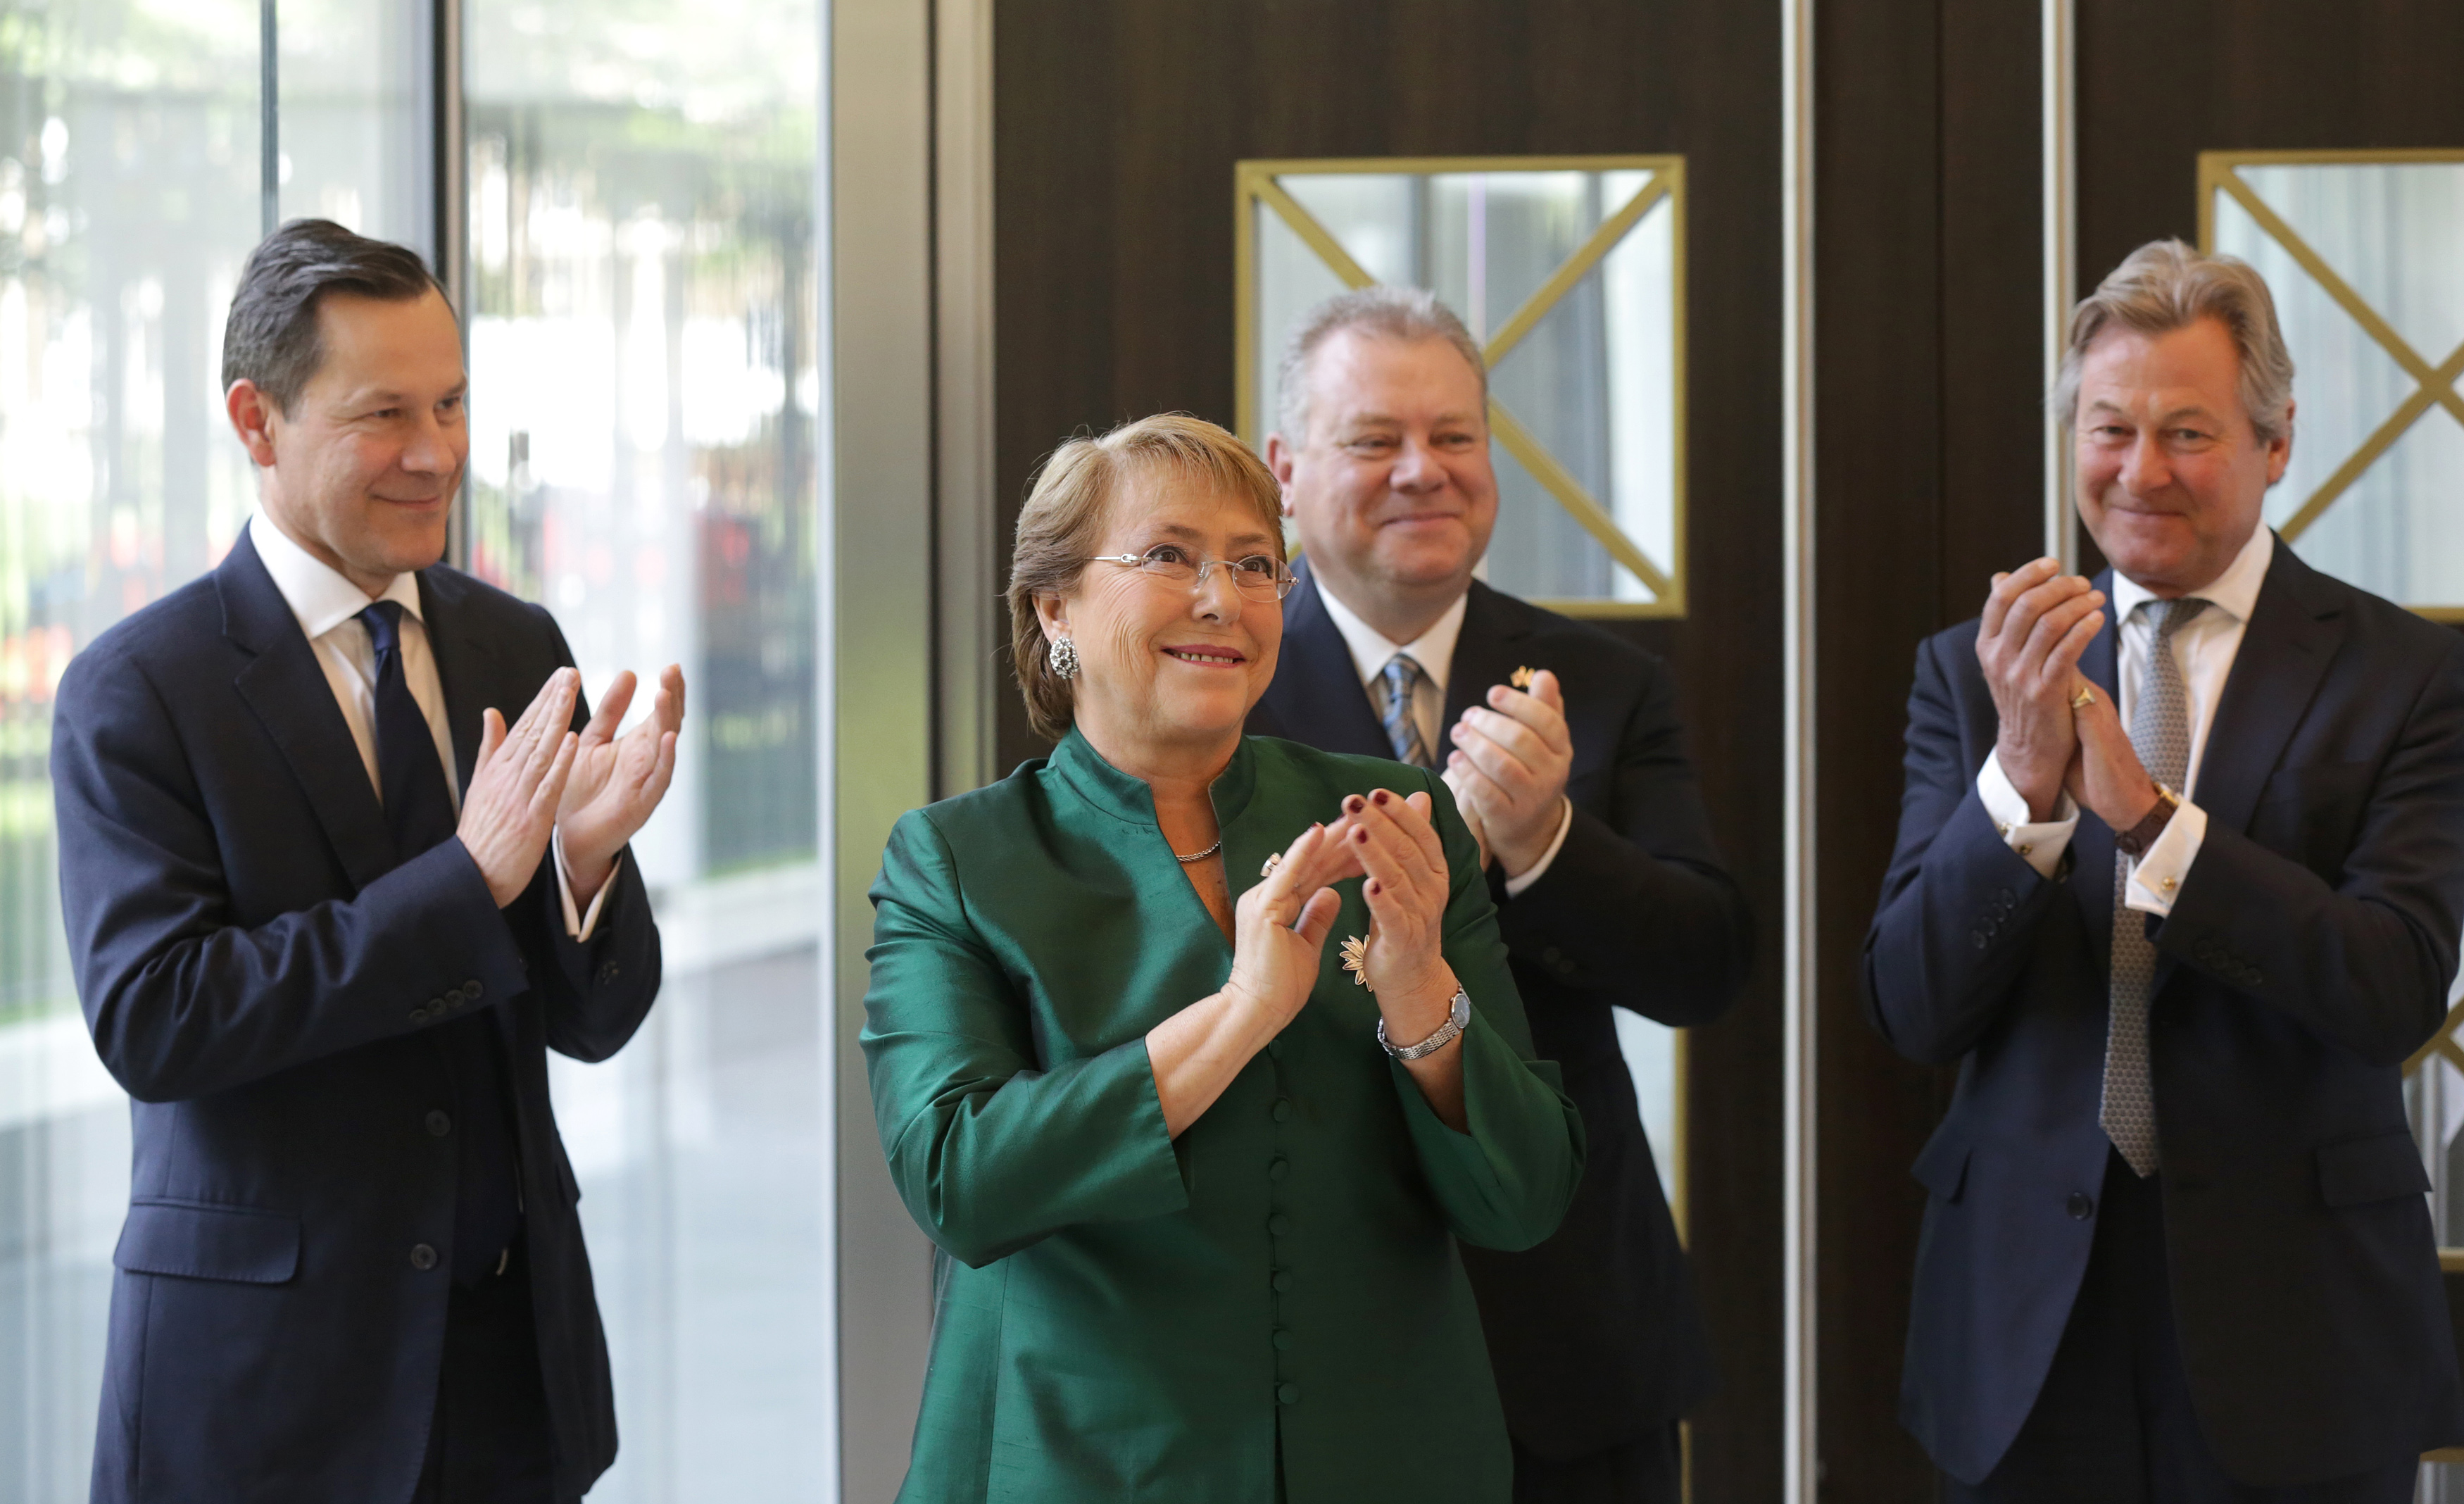 Chilean President Michelle Bachelet applauds at the official opening of new offices at the London Metal Exchange with Adrian Farnham (L) CEO of LME clear , CEO of LME Garry Jones and Richard Thornhill , Chairman of the LME clear board(R),London